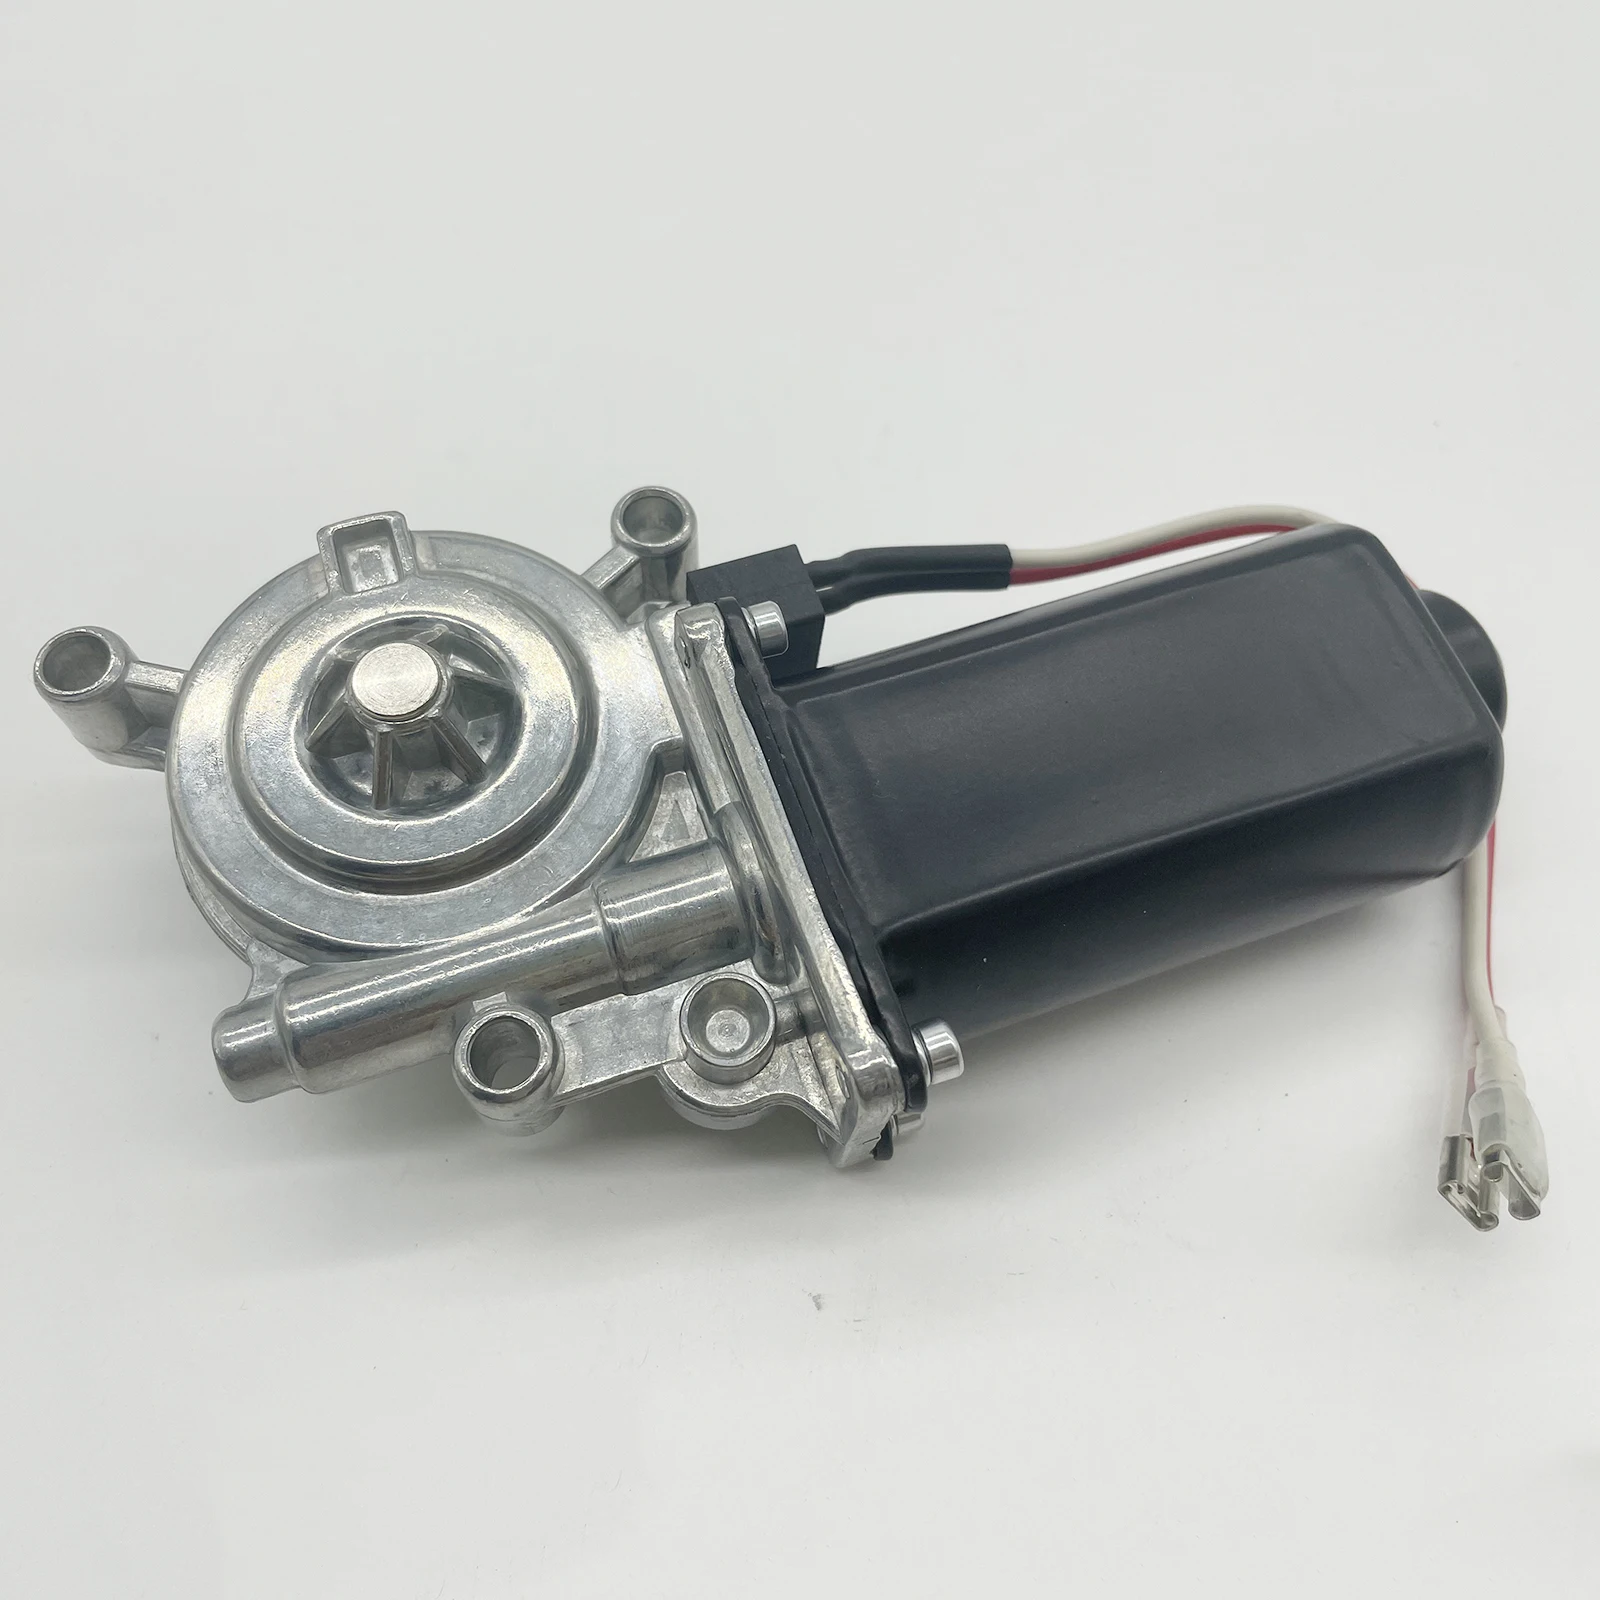 RV Motorhome Trailer Power Awning Replacement Motor Compatible with  266149, 12 DC, 75-RPM motor